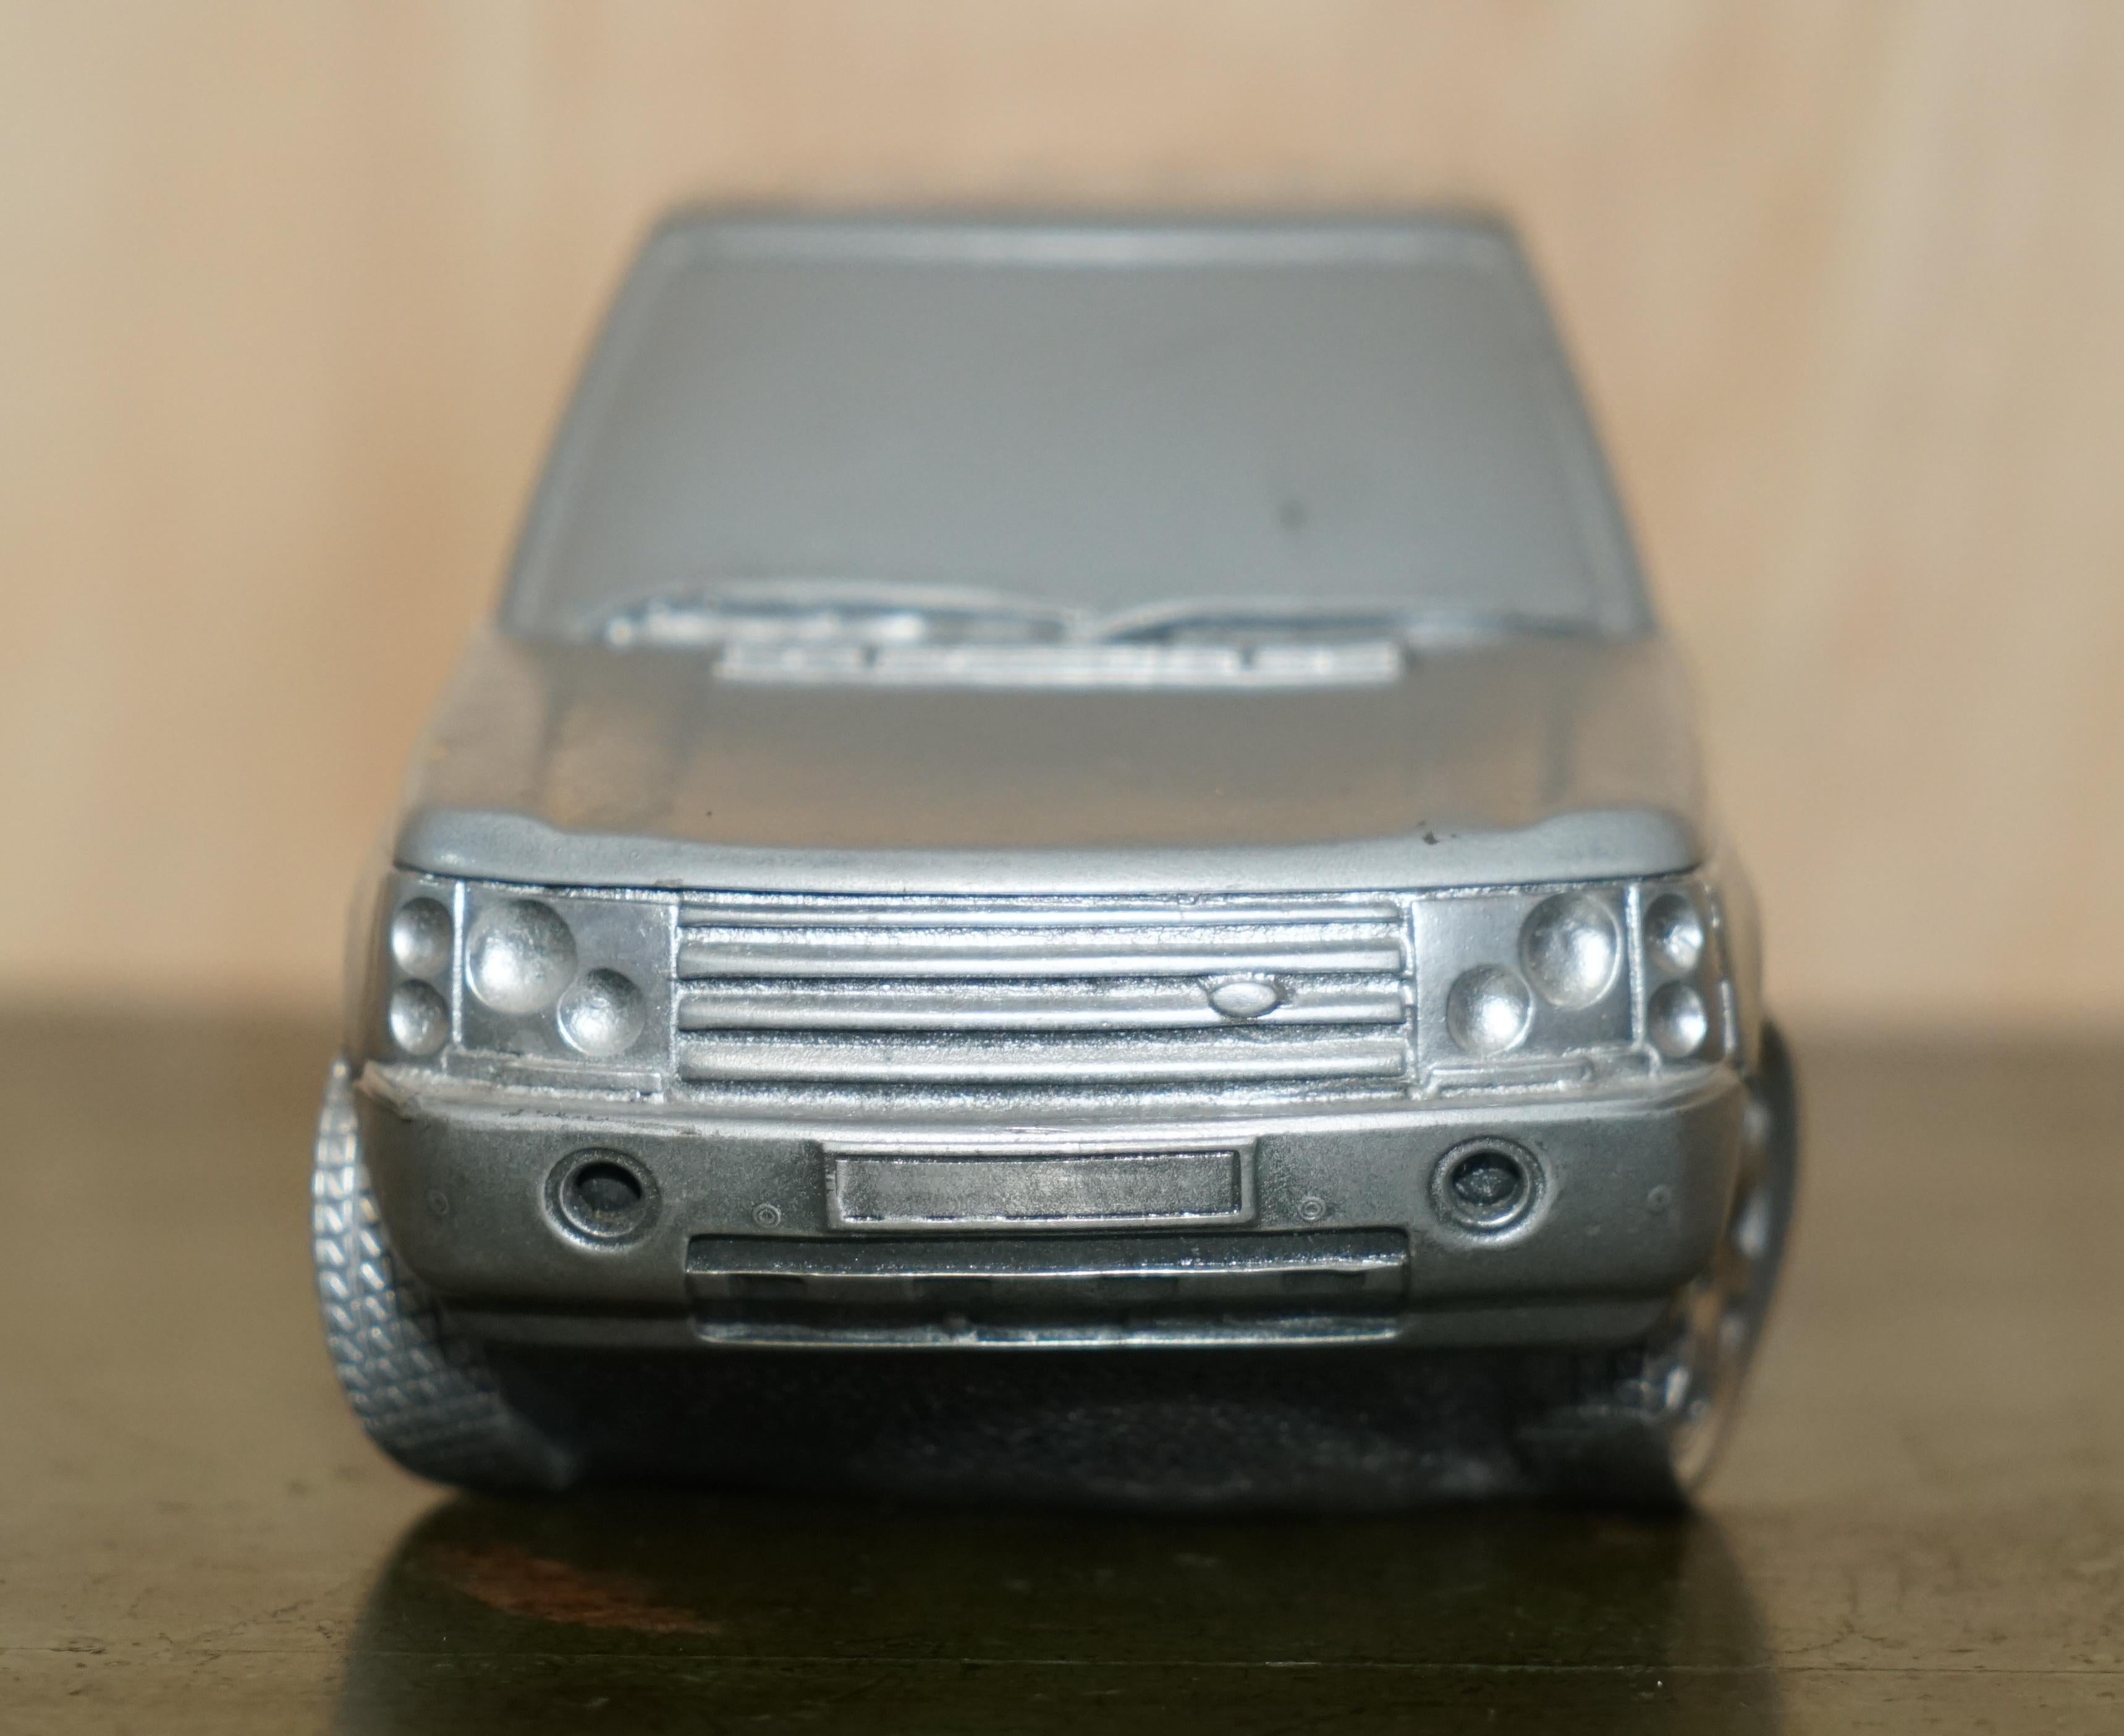 We are is delighted to offer for sale this lovely vintage circa 2005 Compulsion Gallery Pewter model of a Range Rover L322 Third Generation car

I have another of these pewter cars listed under my other items which is a Jaguar Mark I

This car